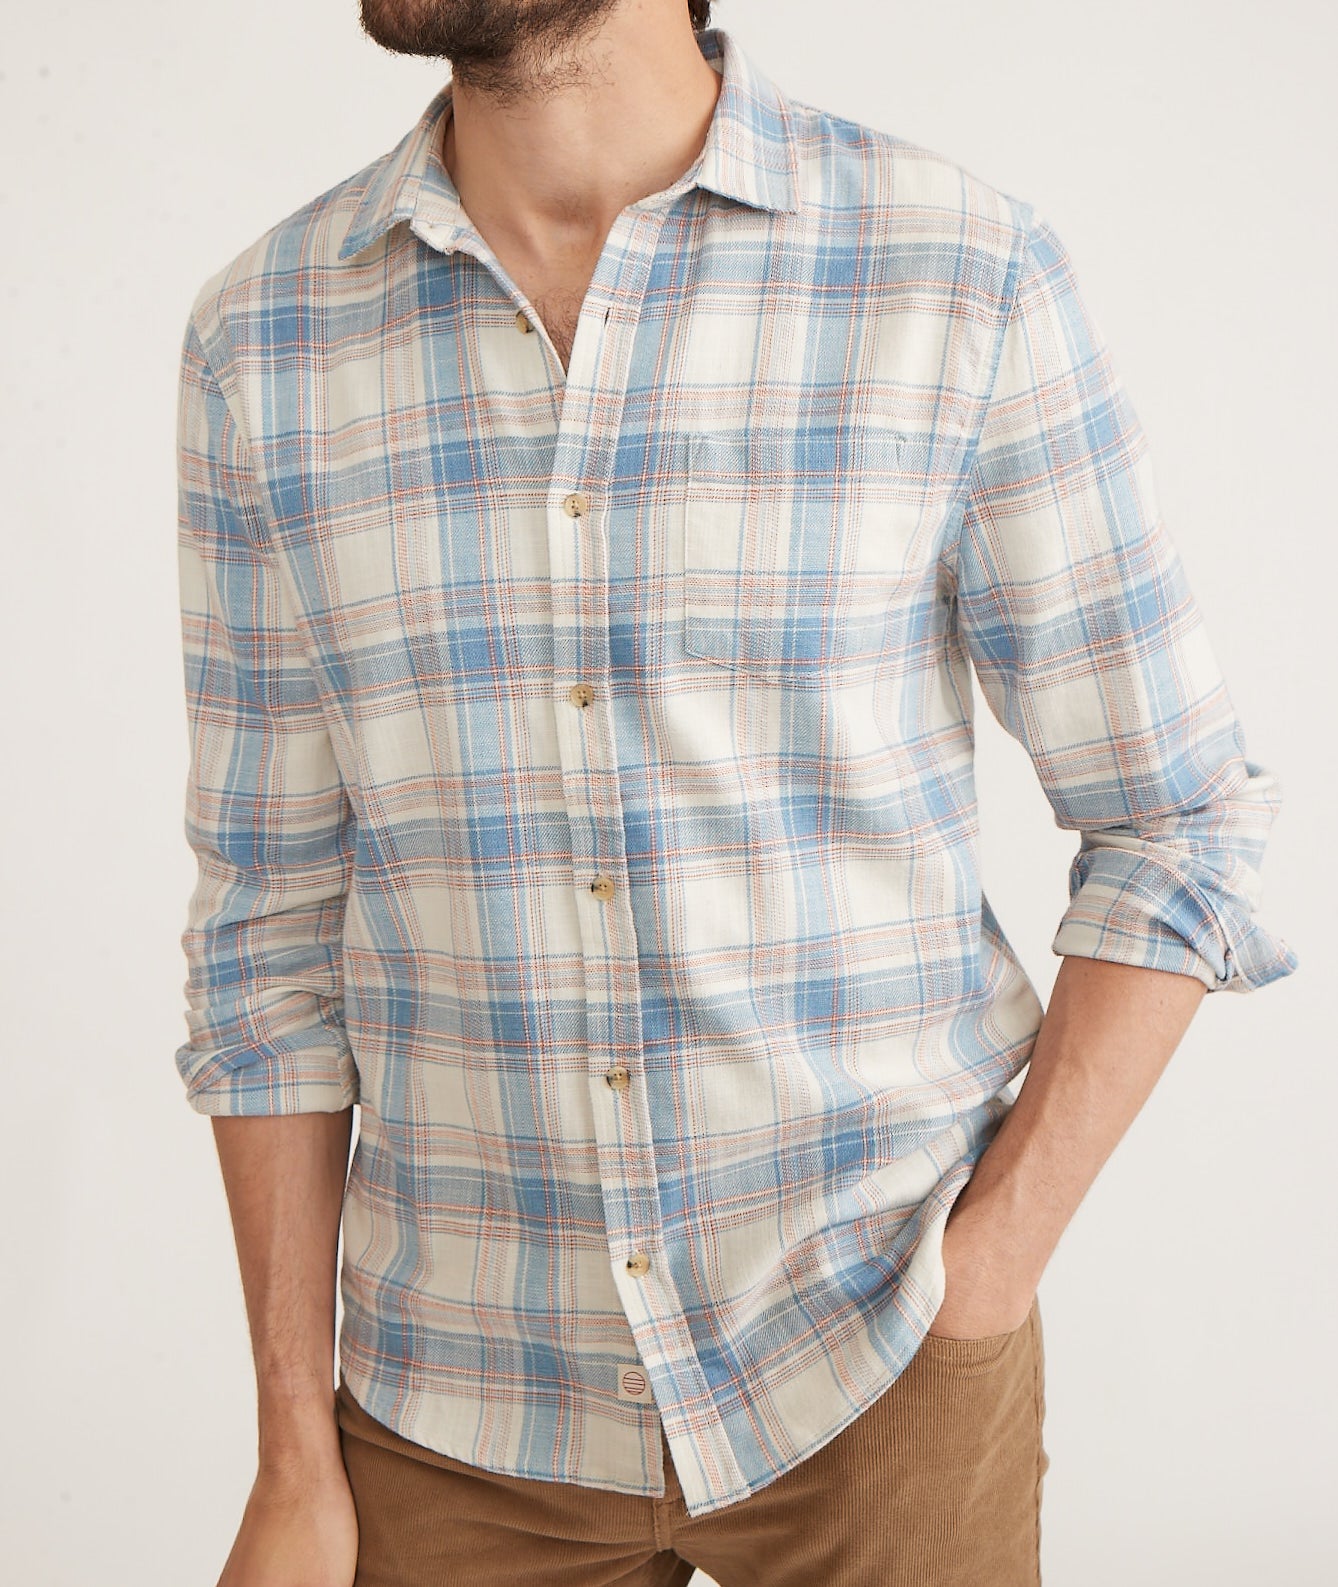 Long Sleeve Classic Stretch Selvage Shirt in Indigo Plaid